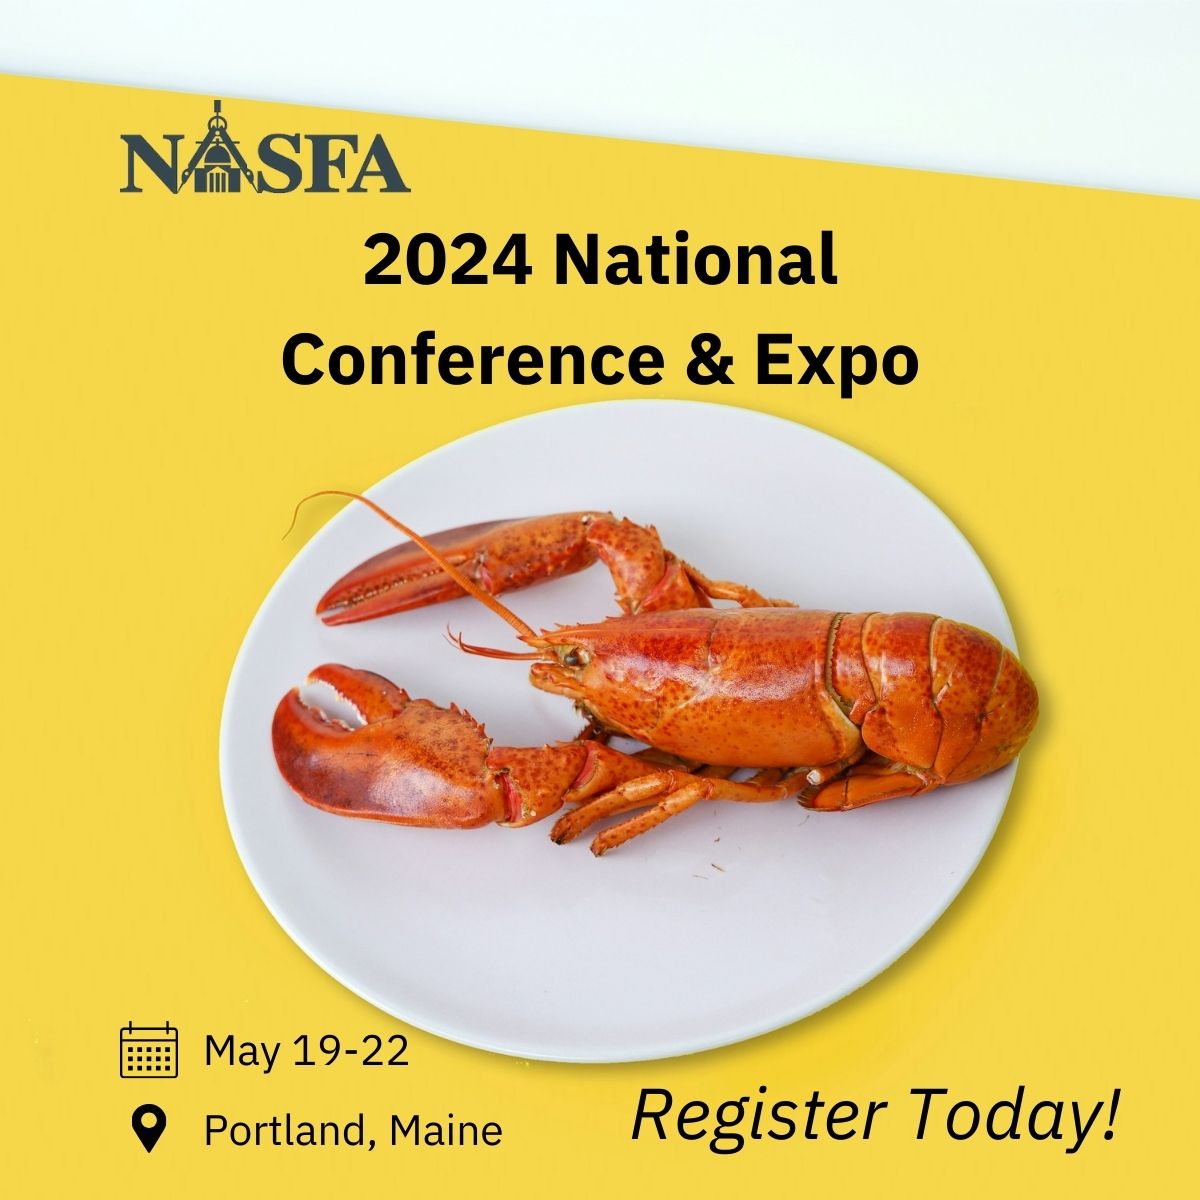 Registration is officially open for @NASFAfacilities annual #conference! Join us this May in Portland, Maine for our educational session to learn all about building a 21st century #FacilityManagement program! #facilitymanager #networking nasfa.net/page/2024Conf